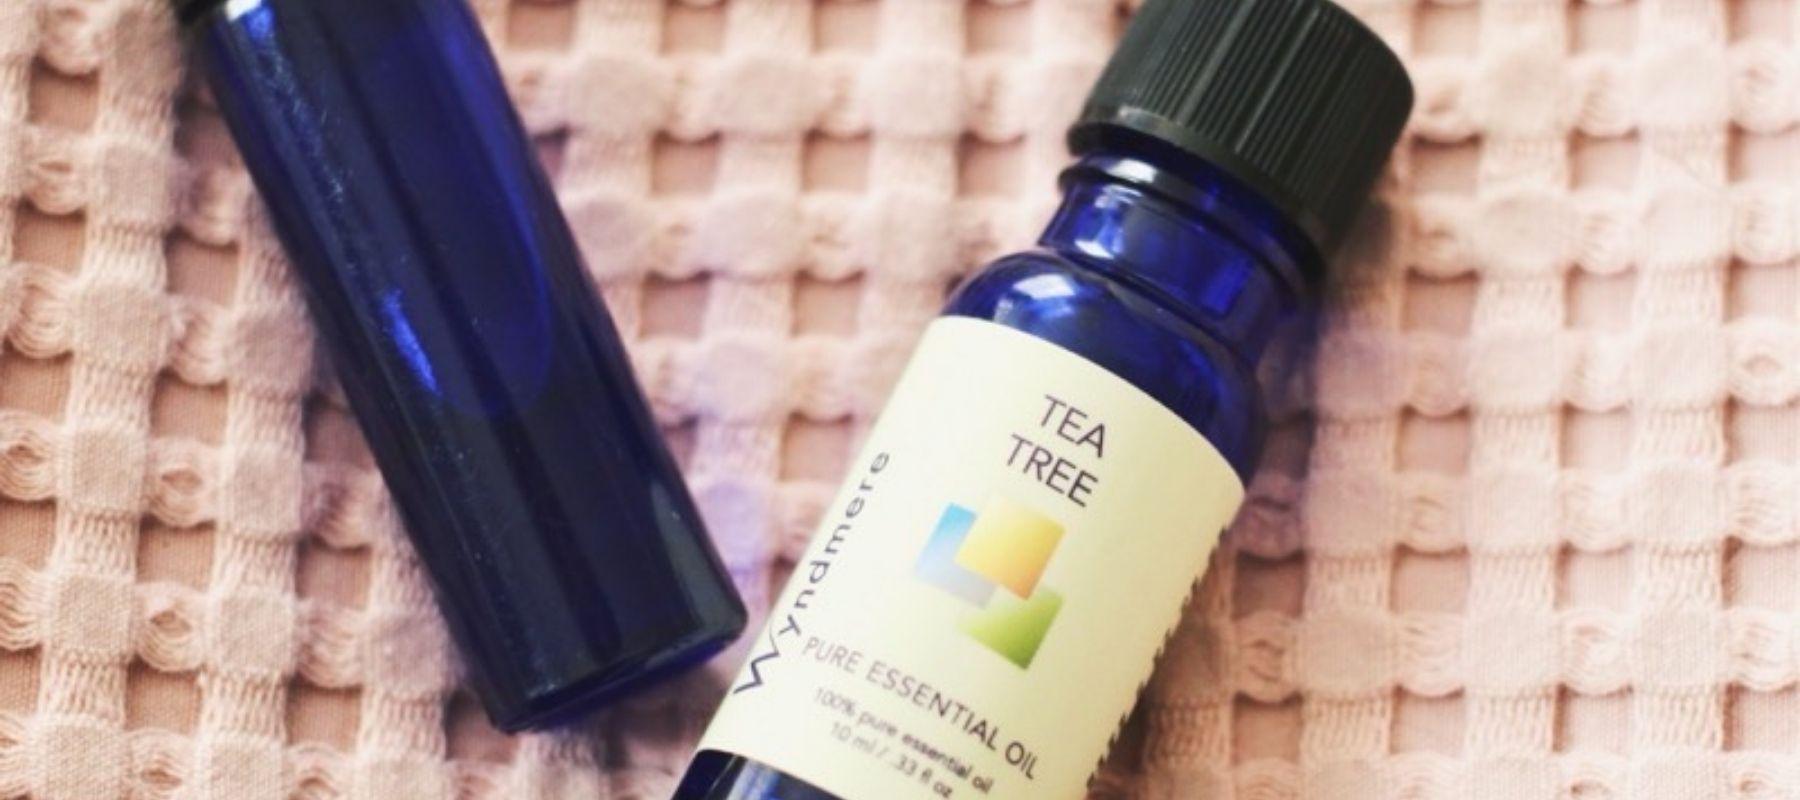 Wyndmere Tea Tree the best pure Essential Oils for therapeutic aromatherapy often used for Acne, Athlete's Foot, Candida, Chicken Pox, Cold Sores, Colds Corns, Cuts, Flu, Insect Bites, Itching, Migraine, Oily Skin, Ringworm, Sinusitis, Sores, Spots